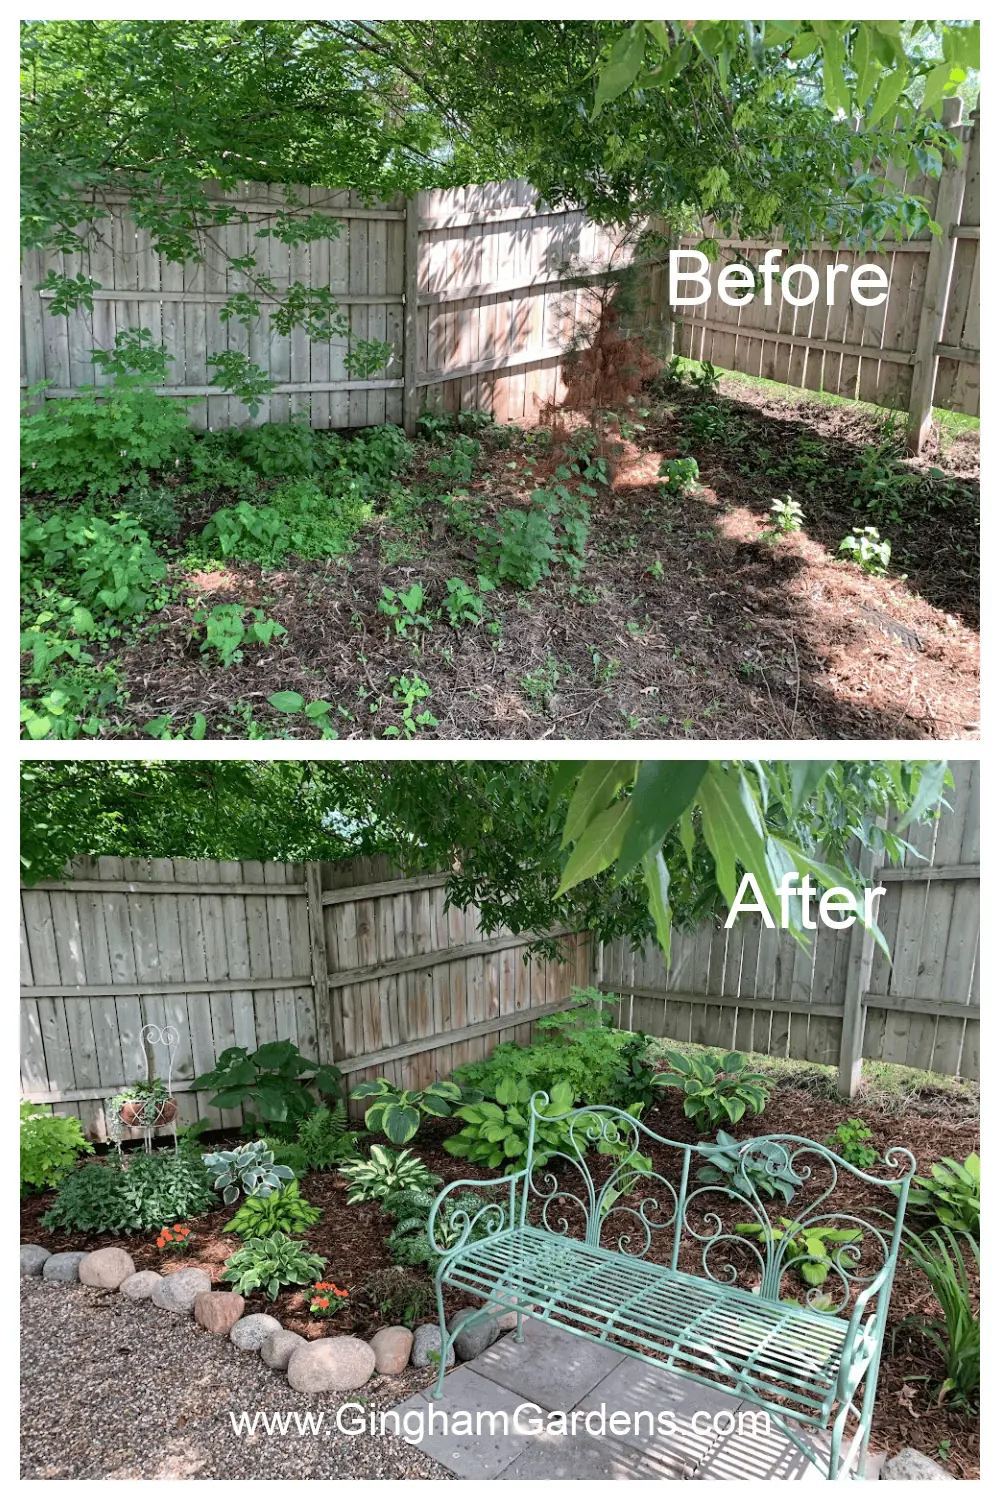 Clearing Overgrown Yards: Restoring Beauty